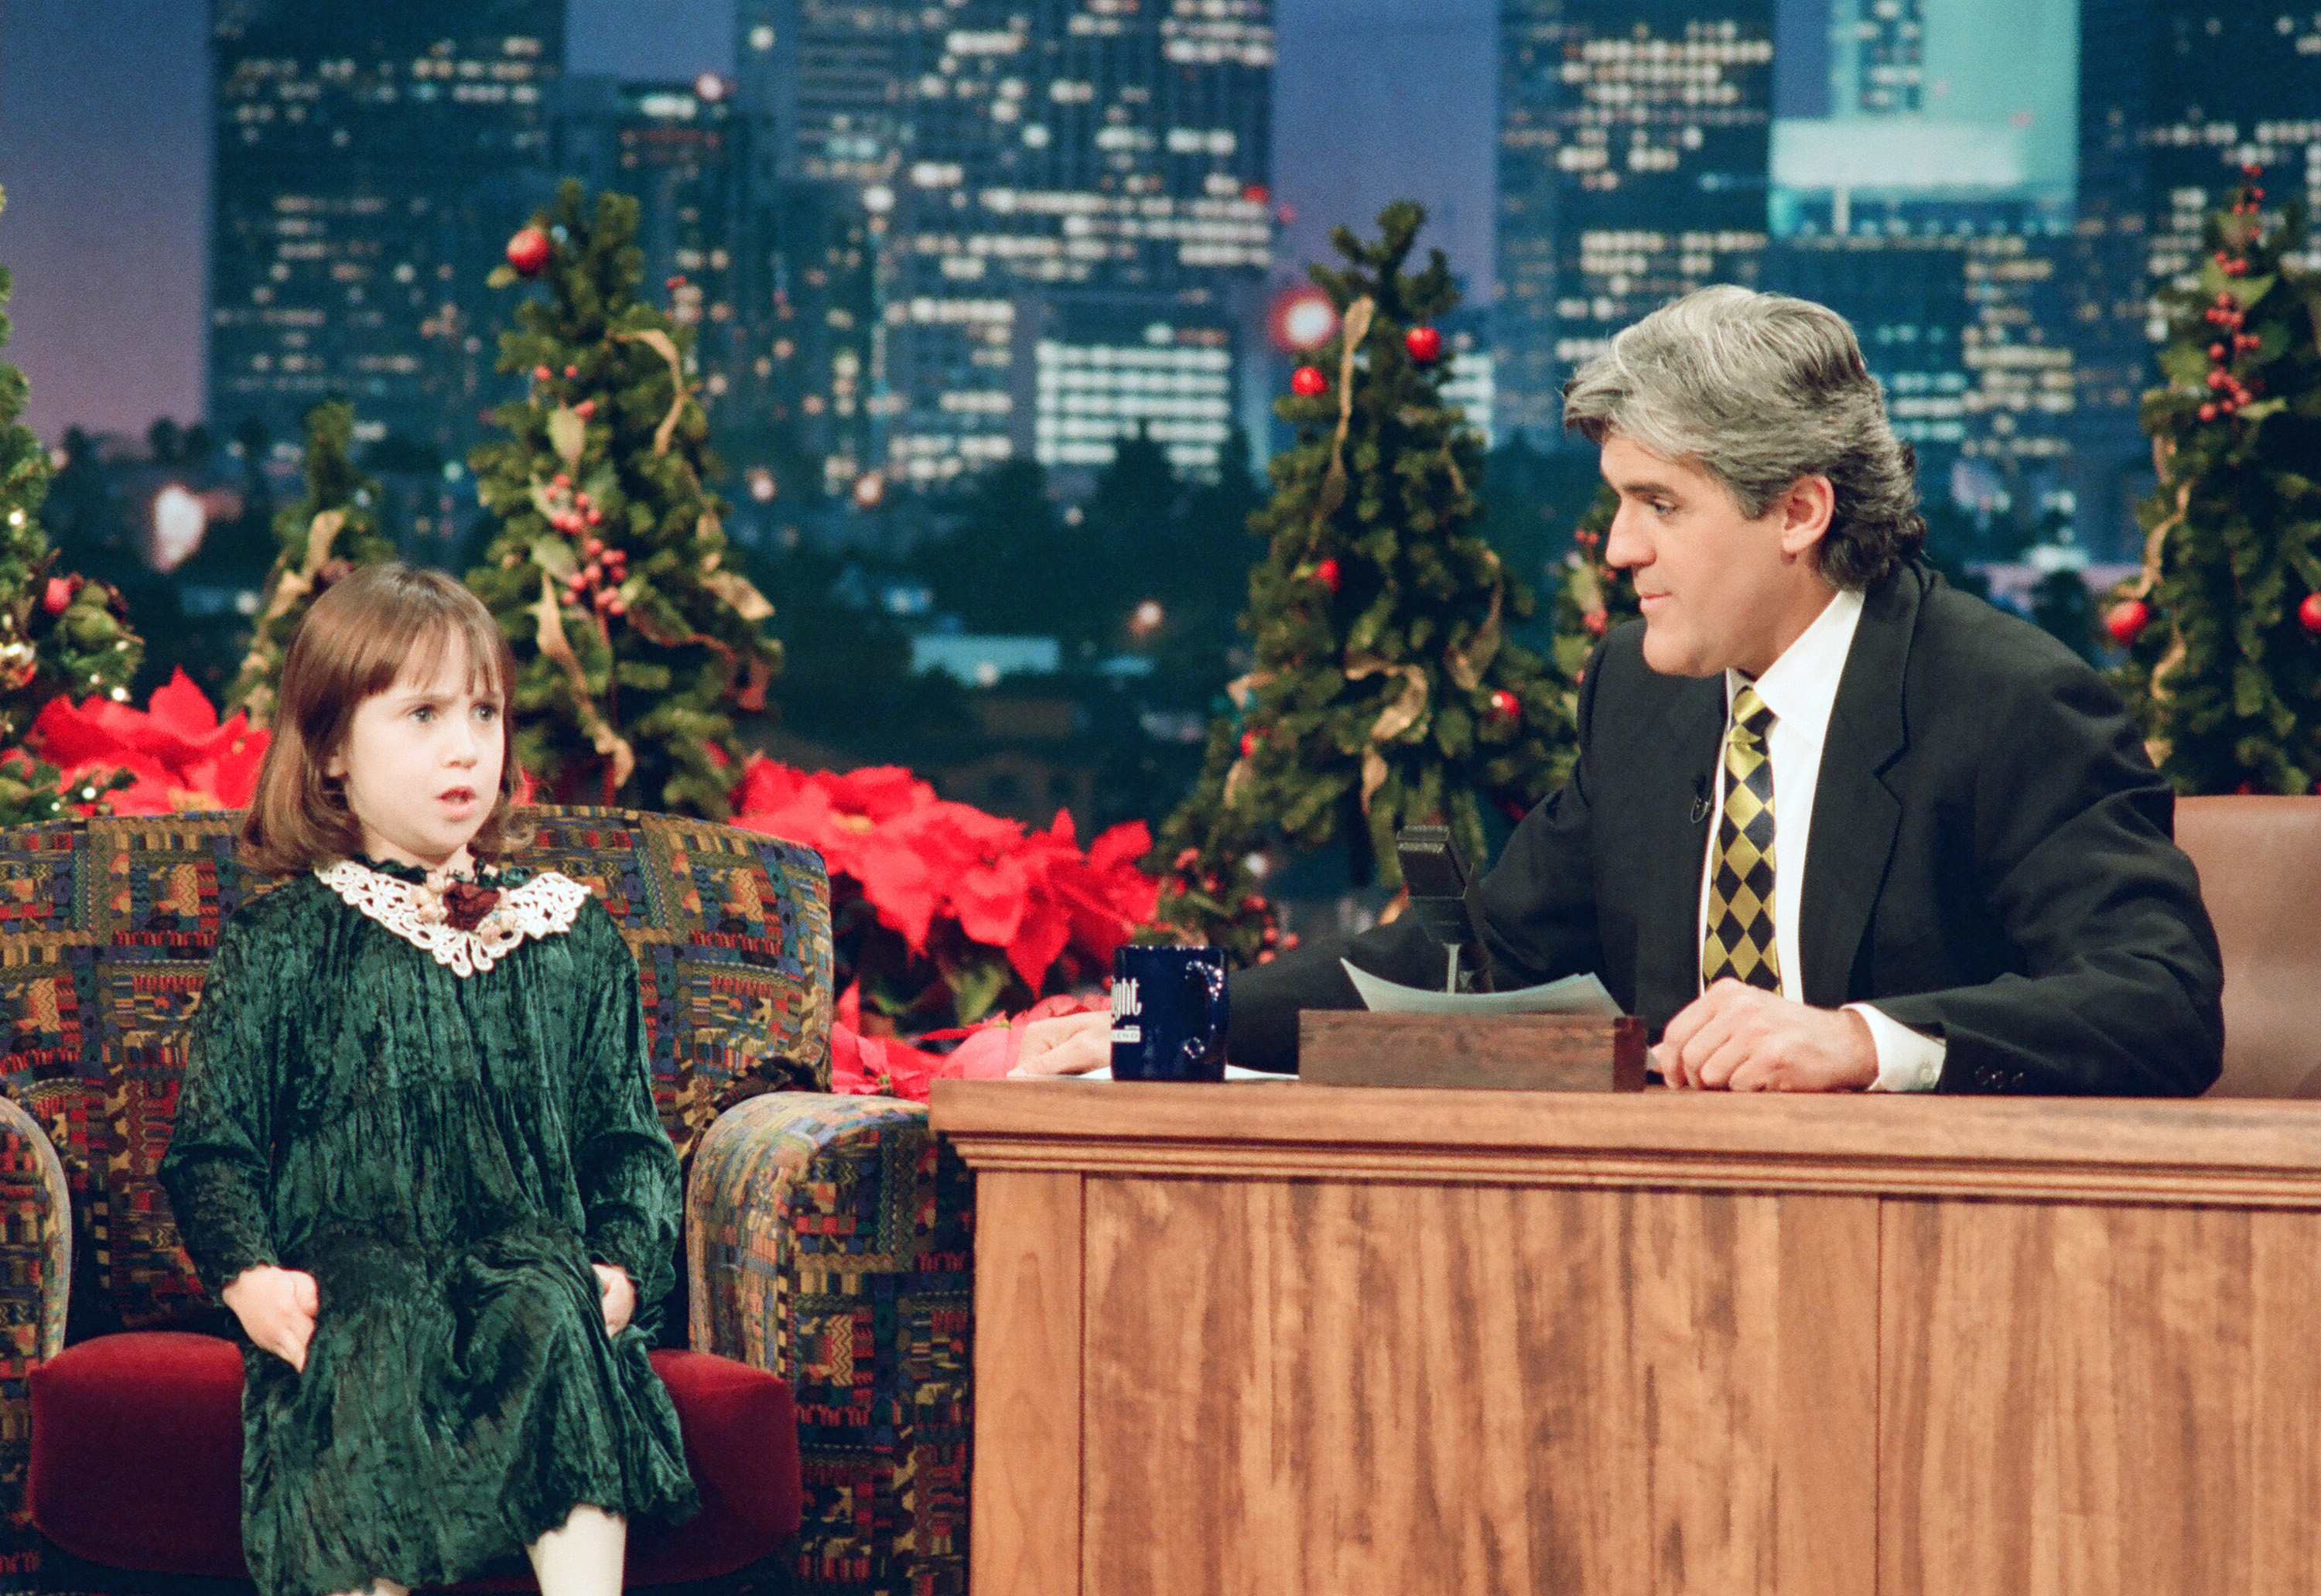 Mara Wilson during an interview with host Jay Leno on "The Tonight Show with Jay Leno, on December 13, 1994. | Source: Getty Images